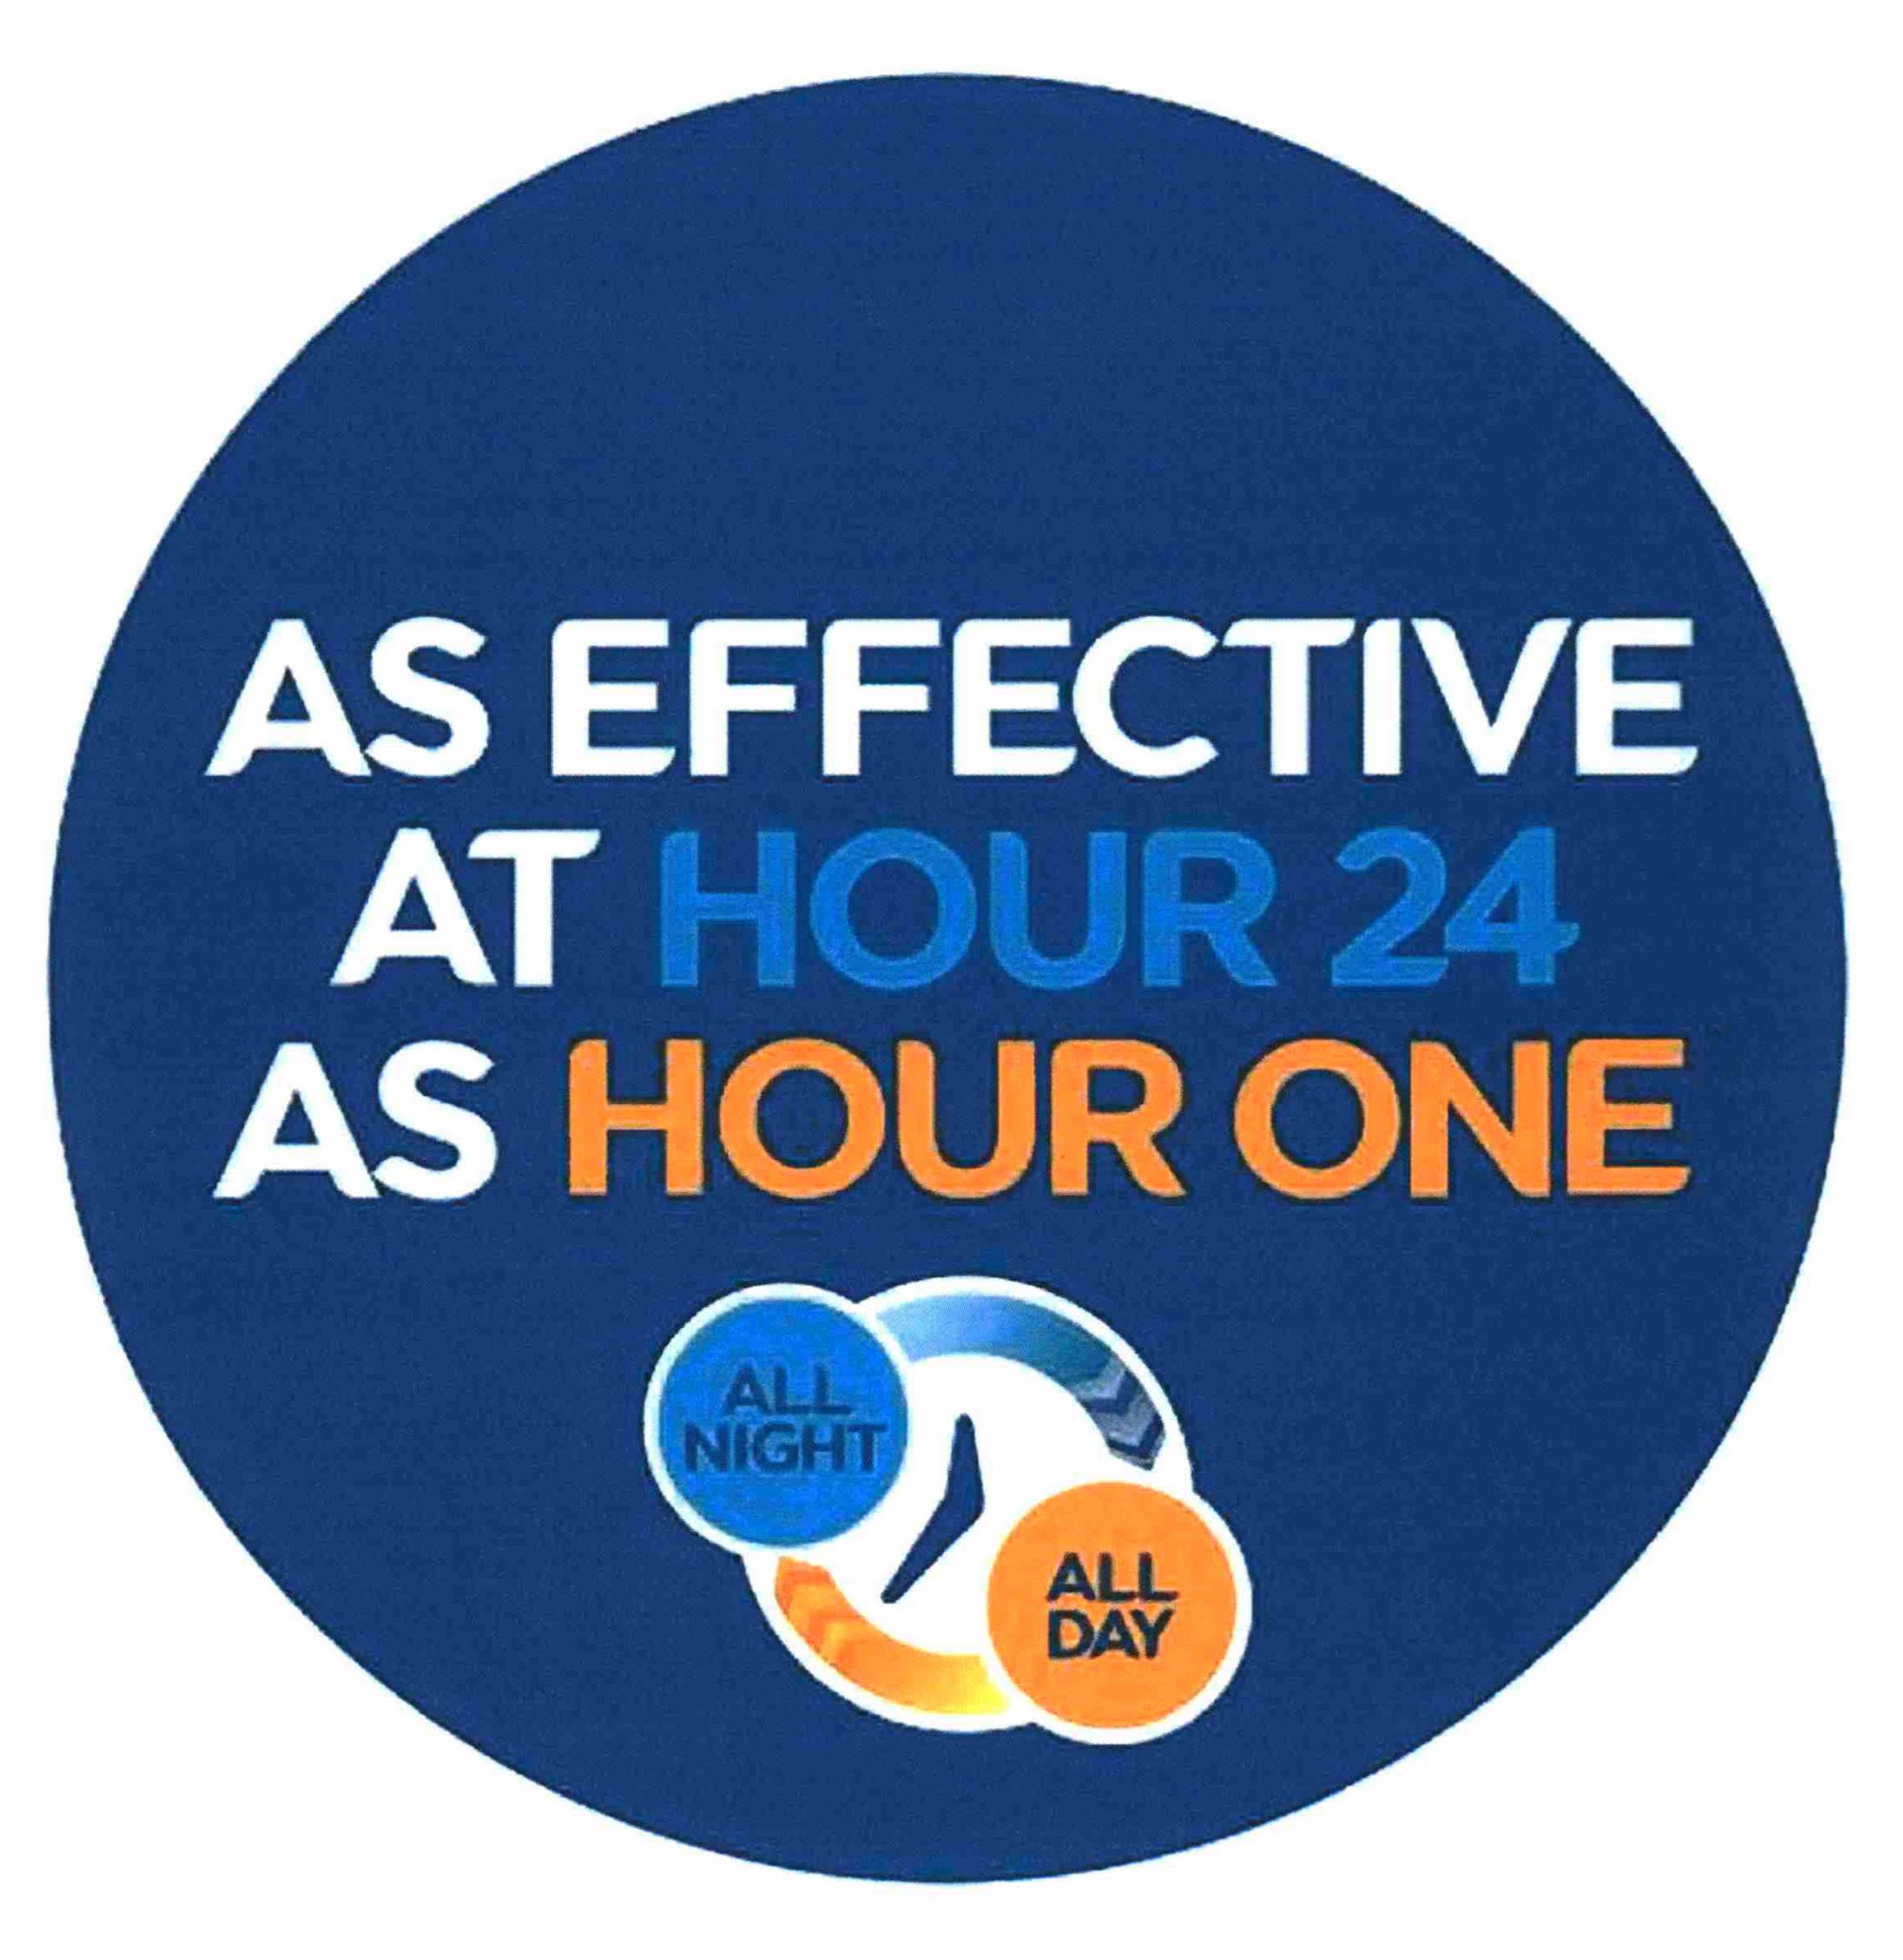  AS EFFECTIVE AT HOUR 24 AS HOUR ONE ALL NIGHT ALL DAY